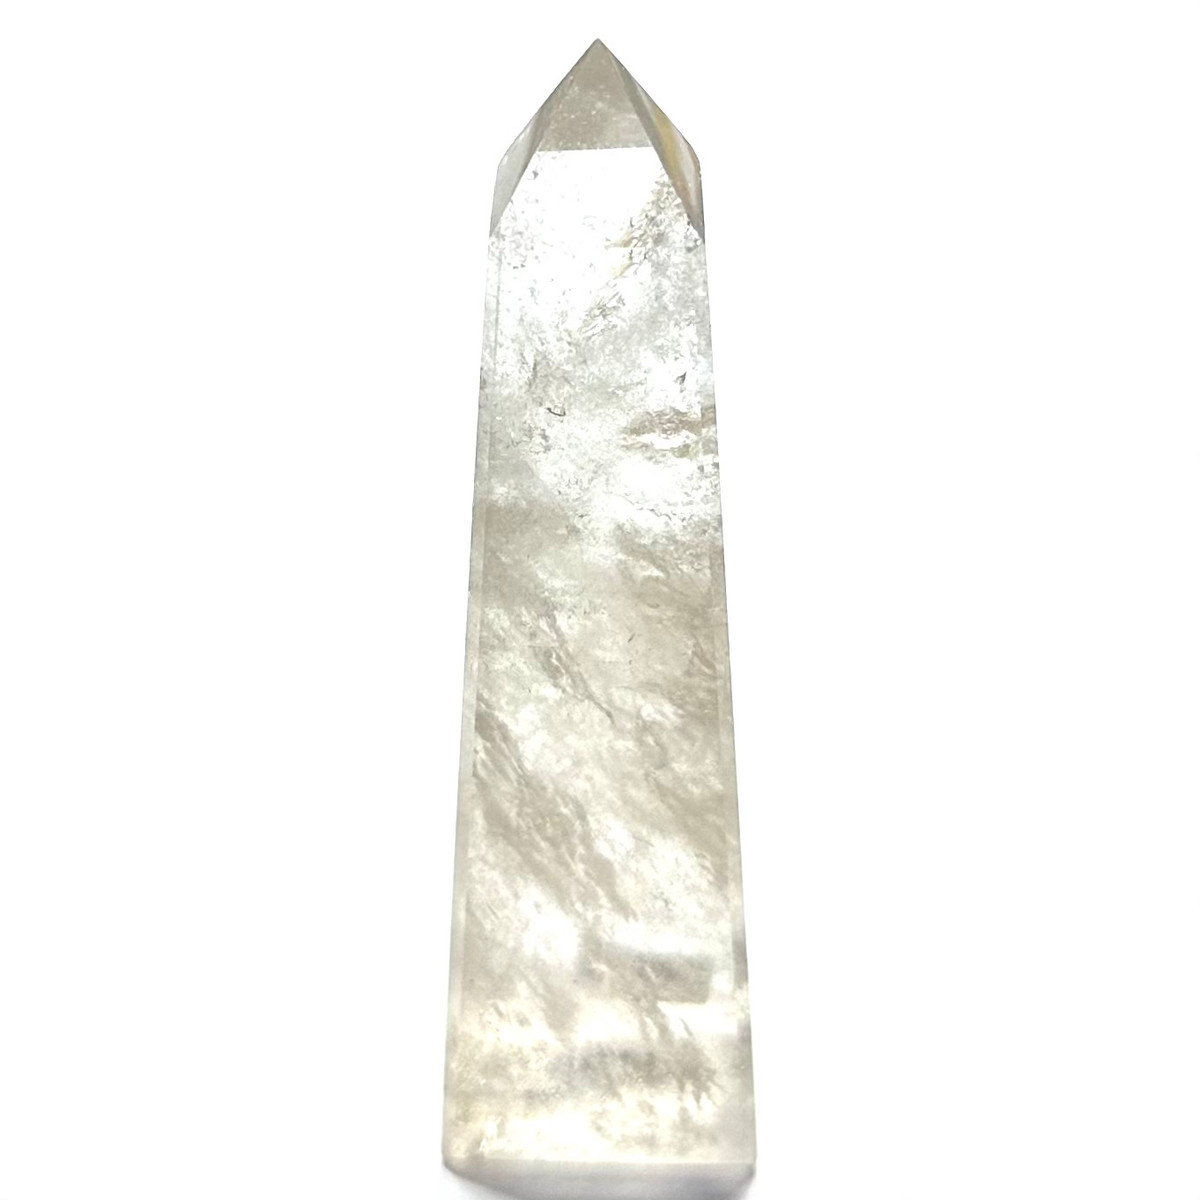 One of a Kind Quartz Crystal with Rainbow Inclusions Tower-3 3/4 x 1 1/4"